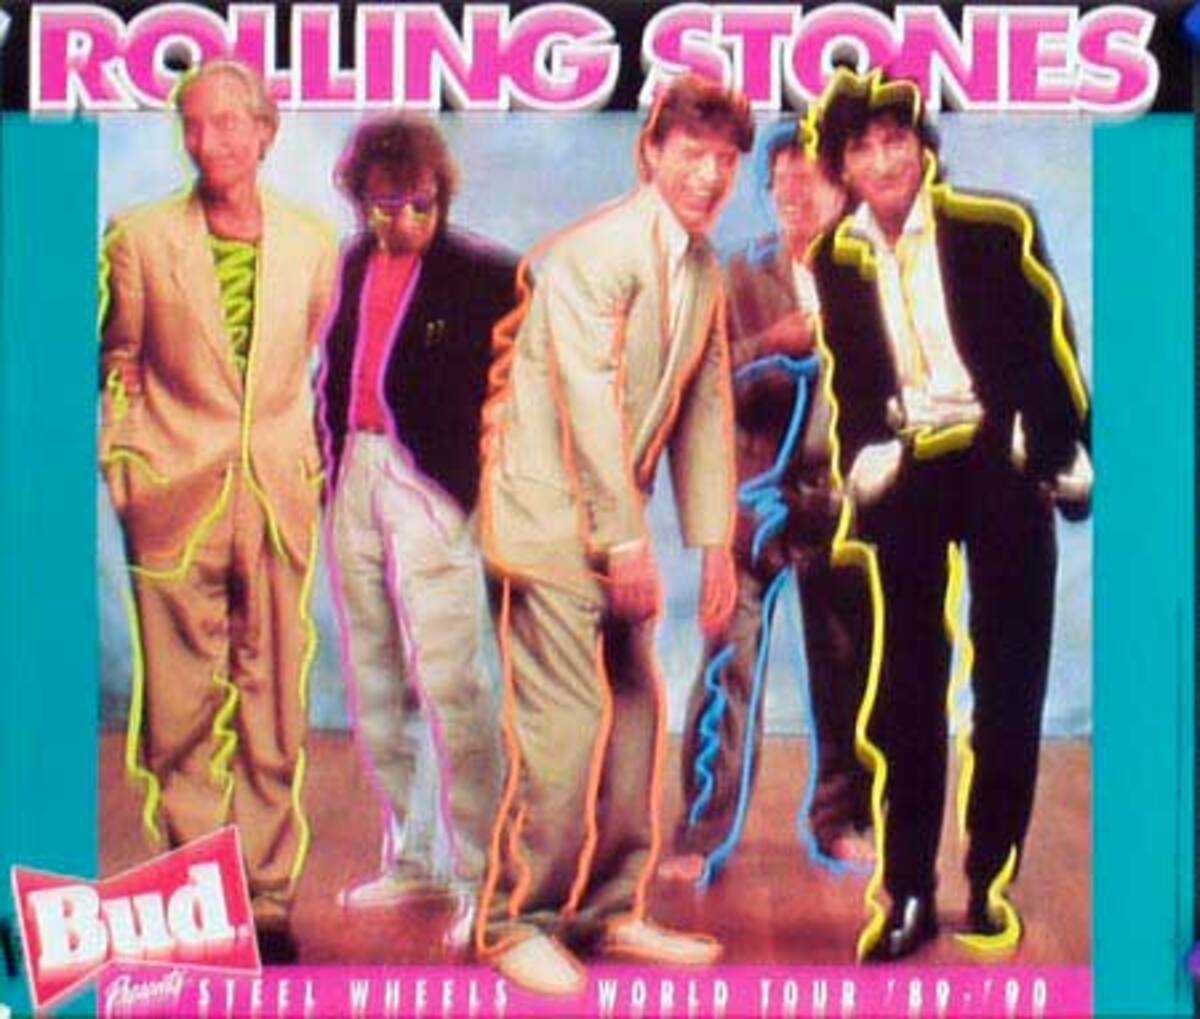 Rolling Stones Original Rock and Roll Poster Steel Wheel Tour bud sm